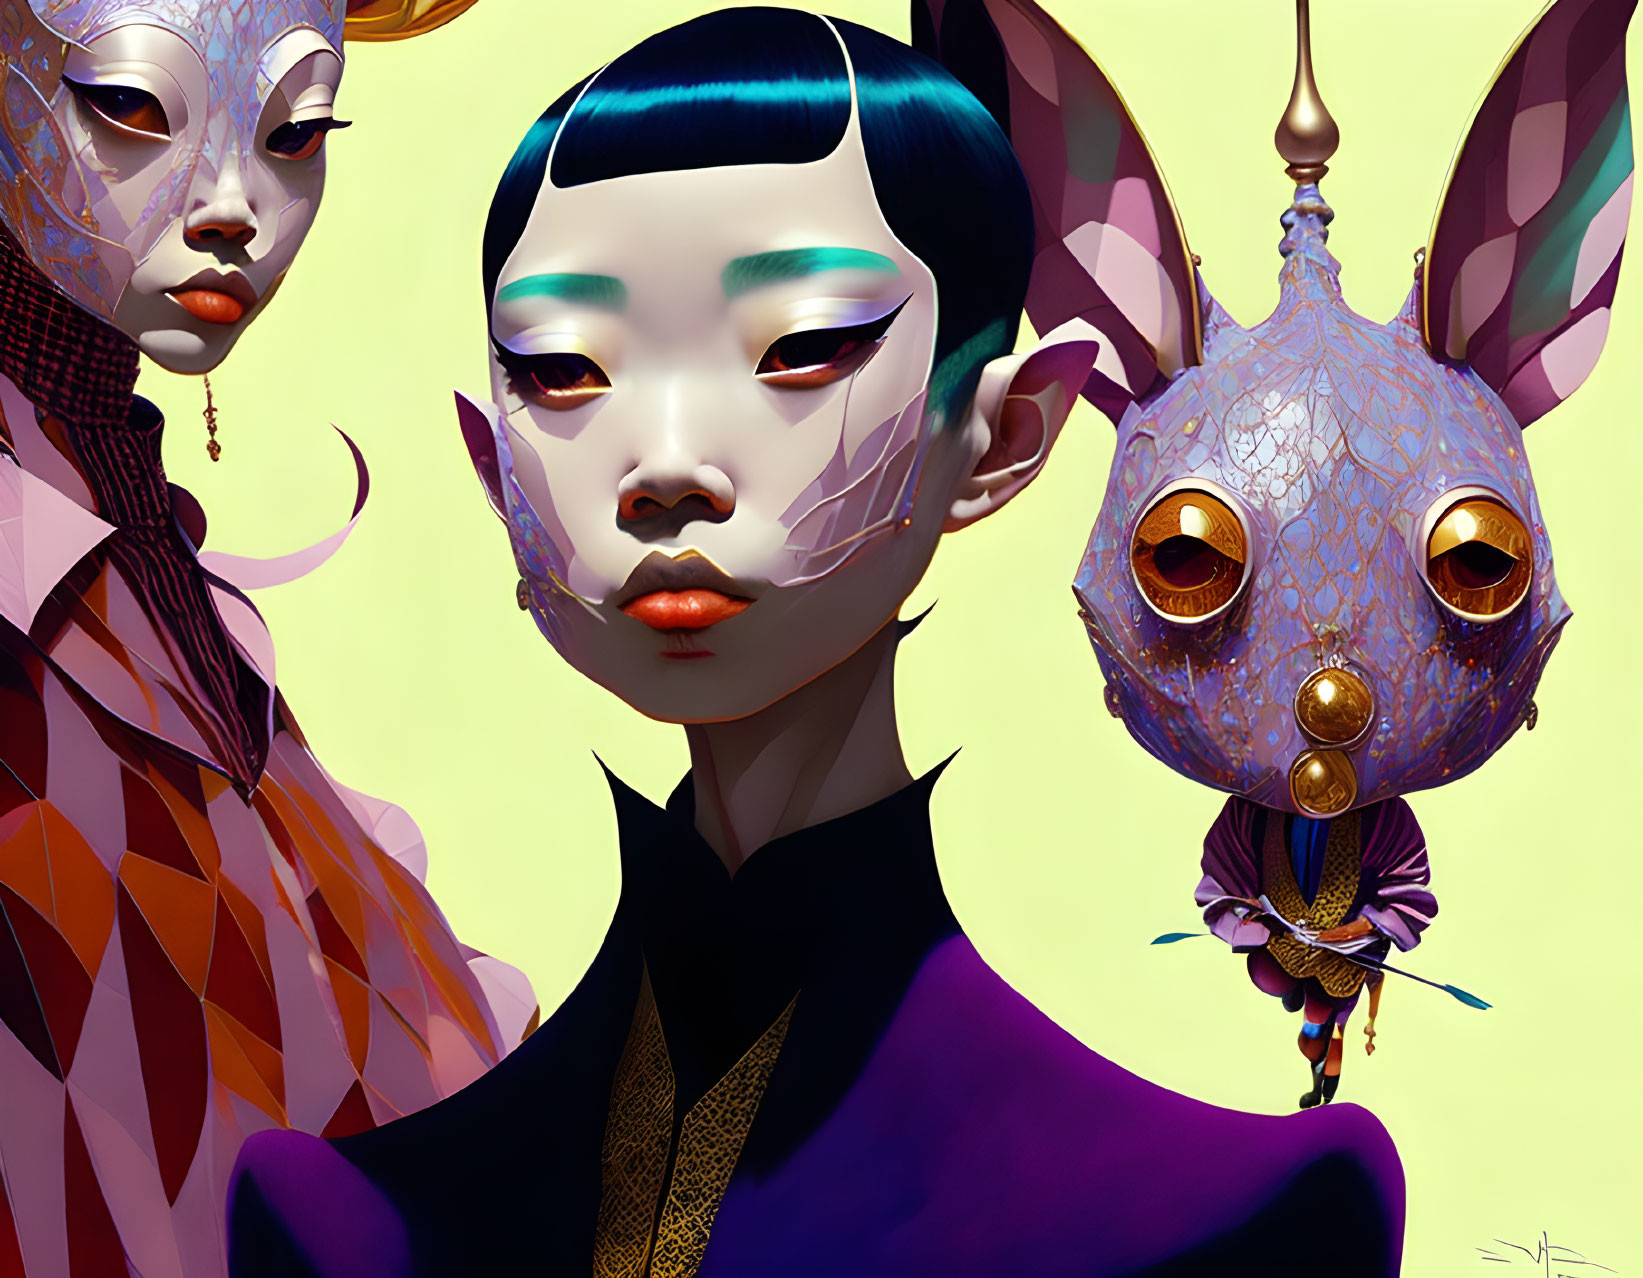 Stylized female figures with elaborate face paint and whimsical creature